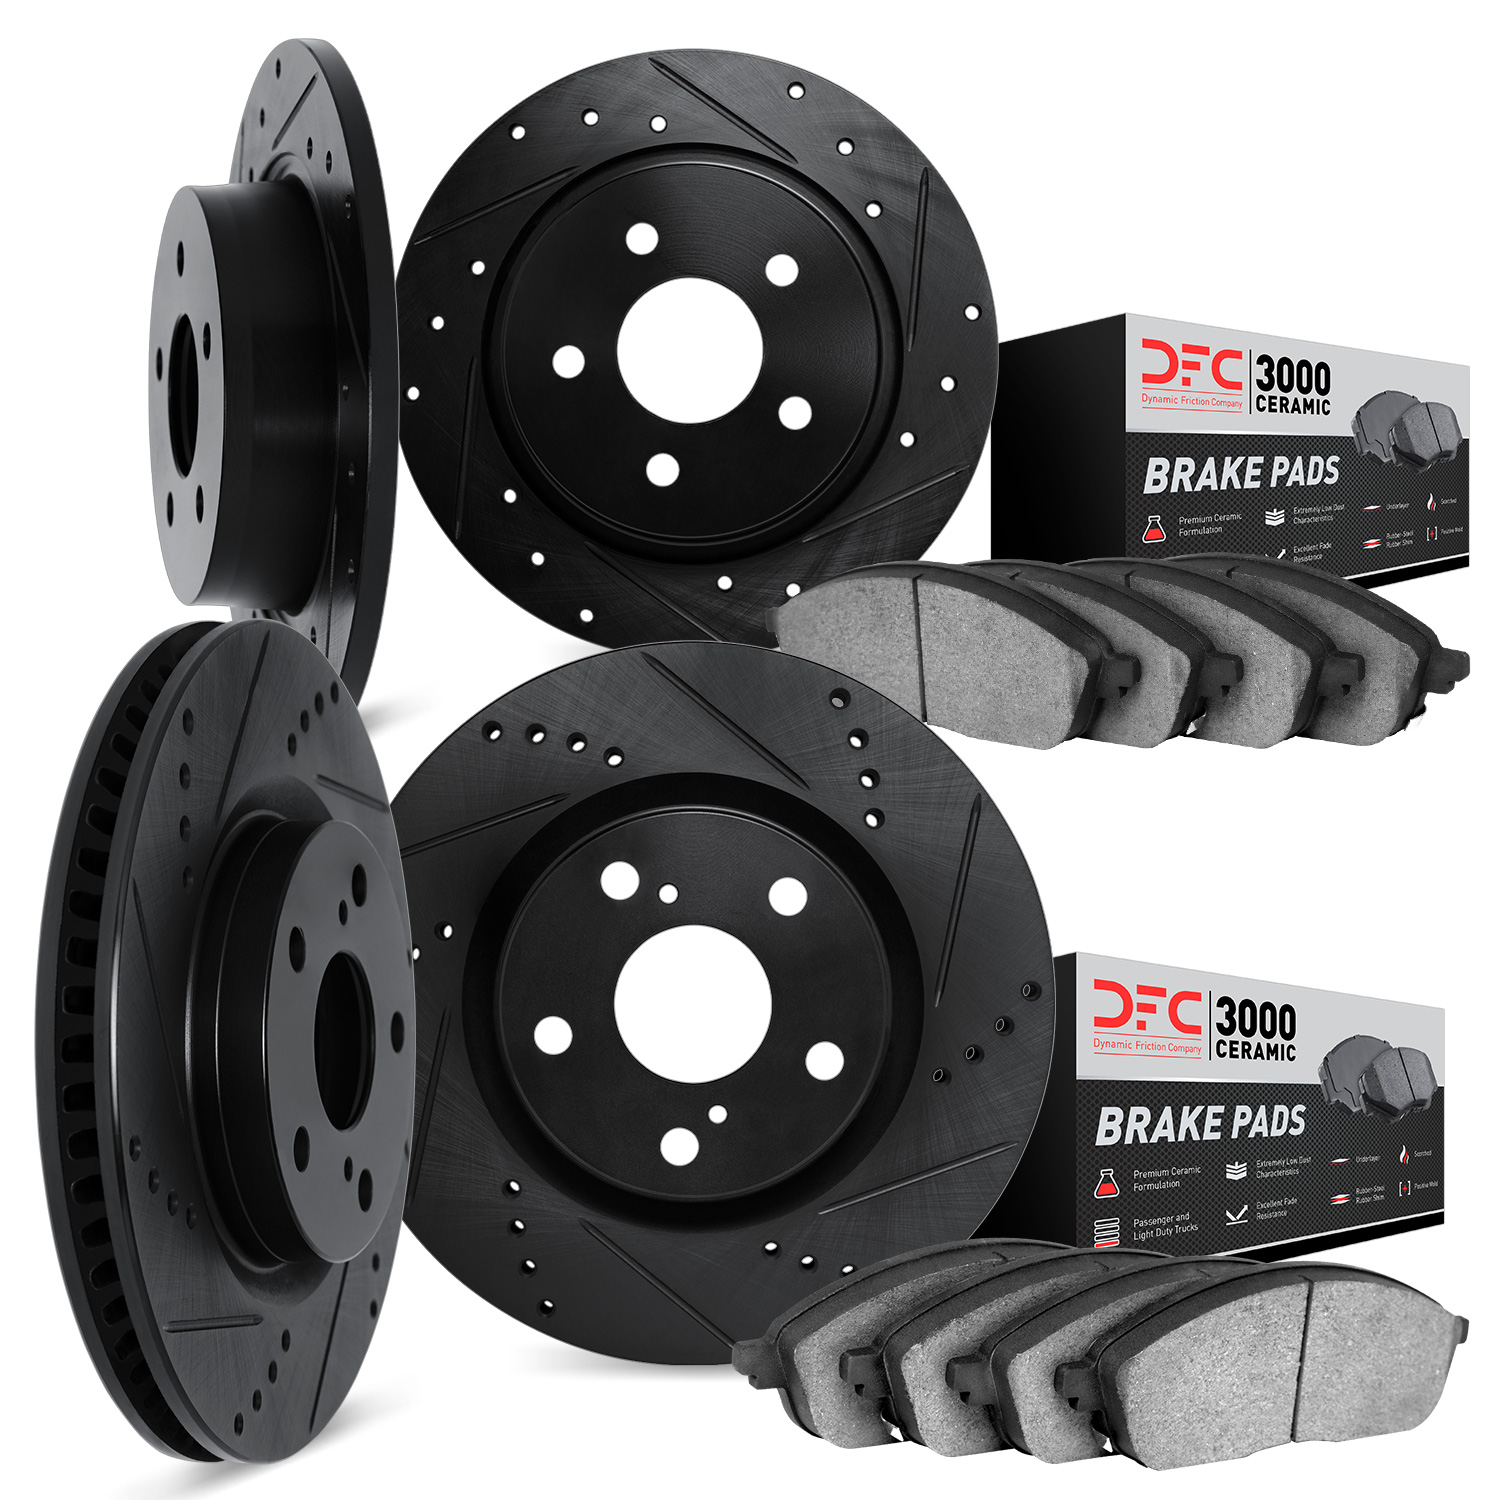 8304-54070 Drilled/Slotted Brake Rotors with 3000-Series Ceramic Brake Pads Kit [Black], 2012-2013 Volvo, Position: Front and Re